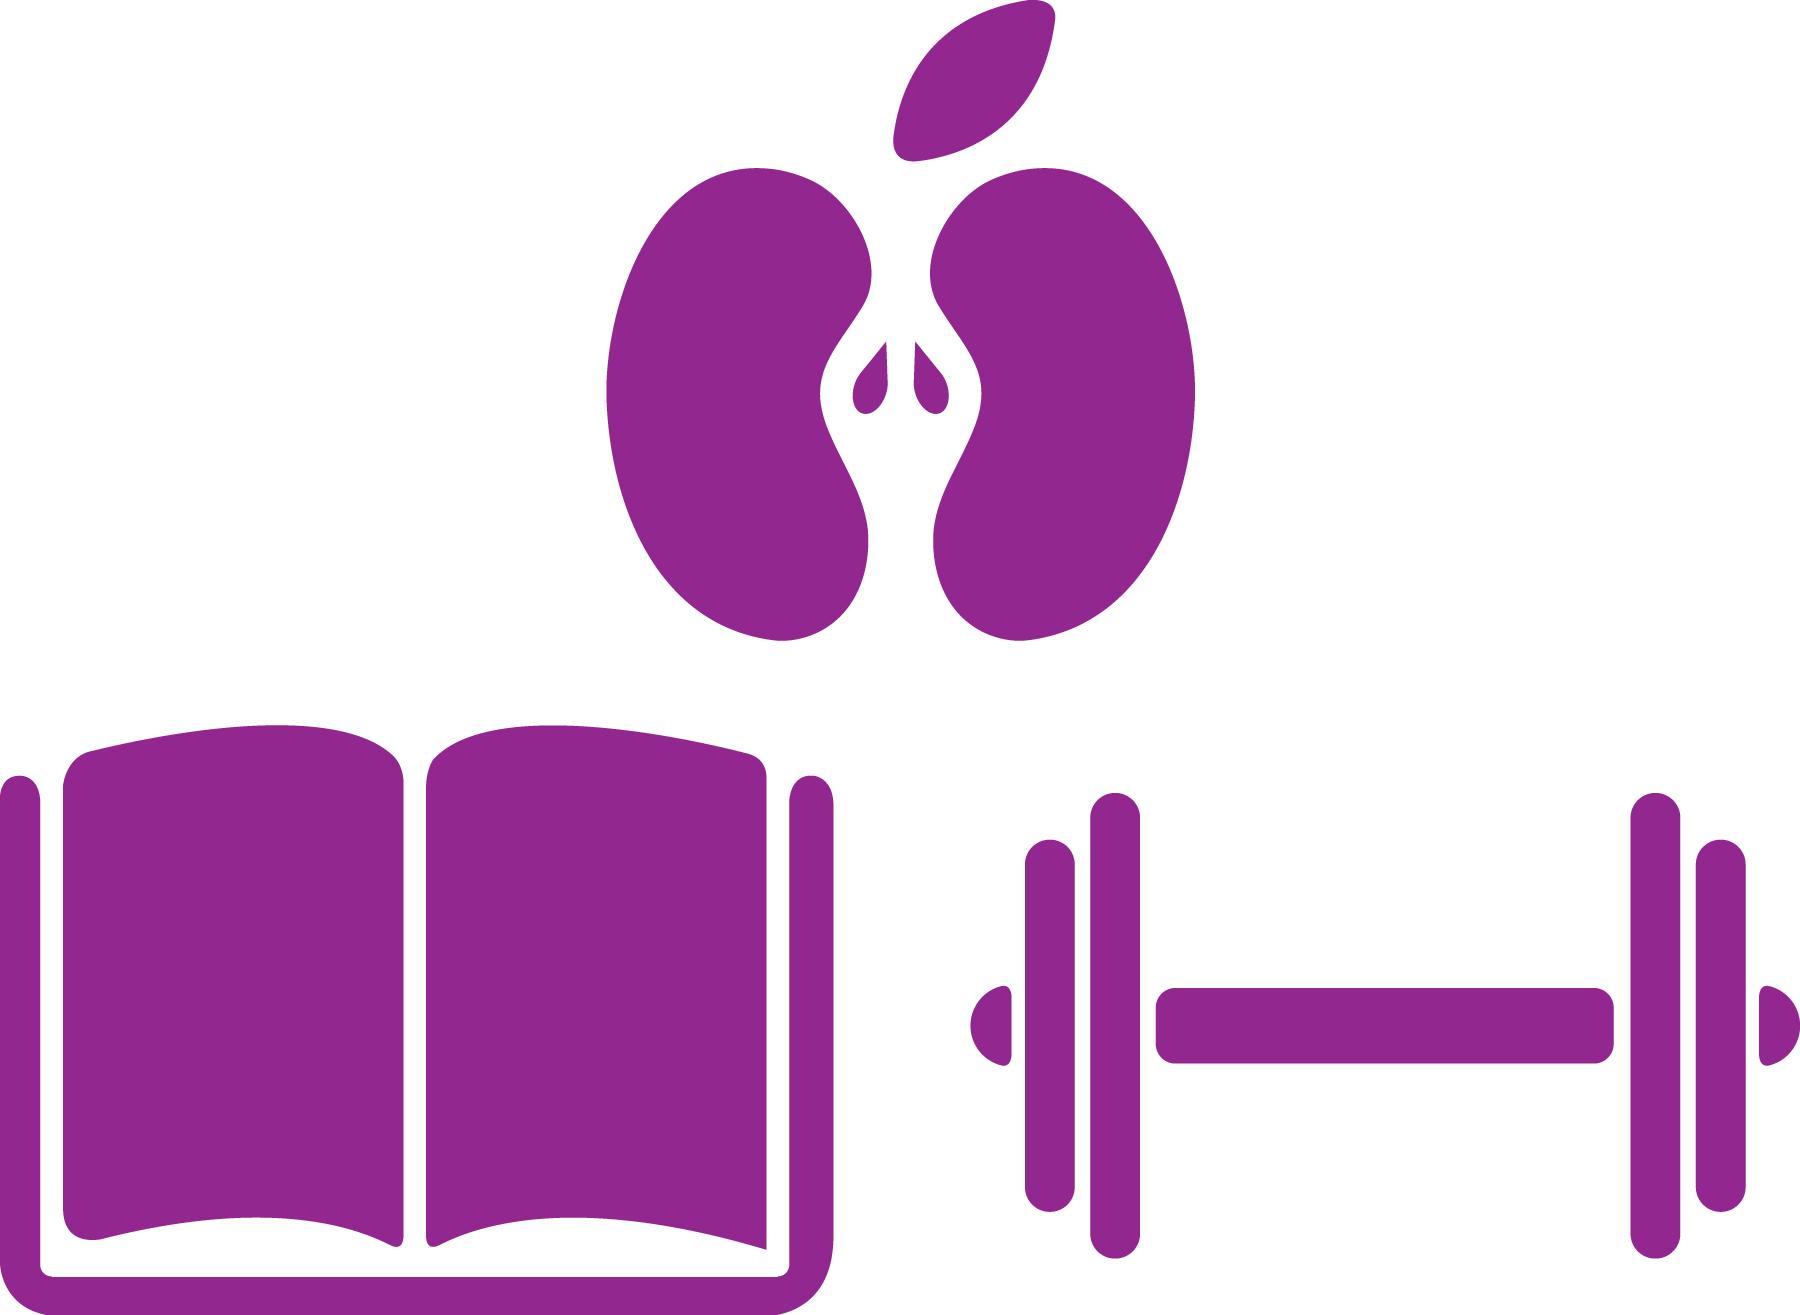 Illustration of a book, apple, and a dumbbell